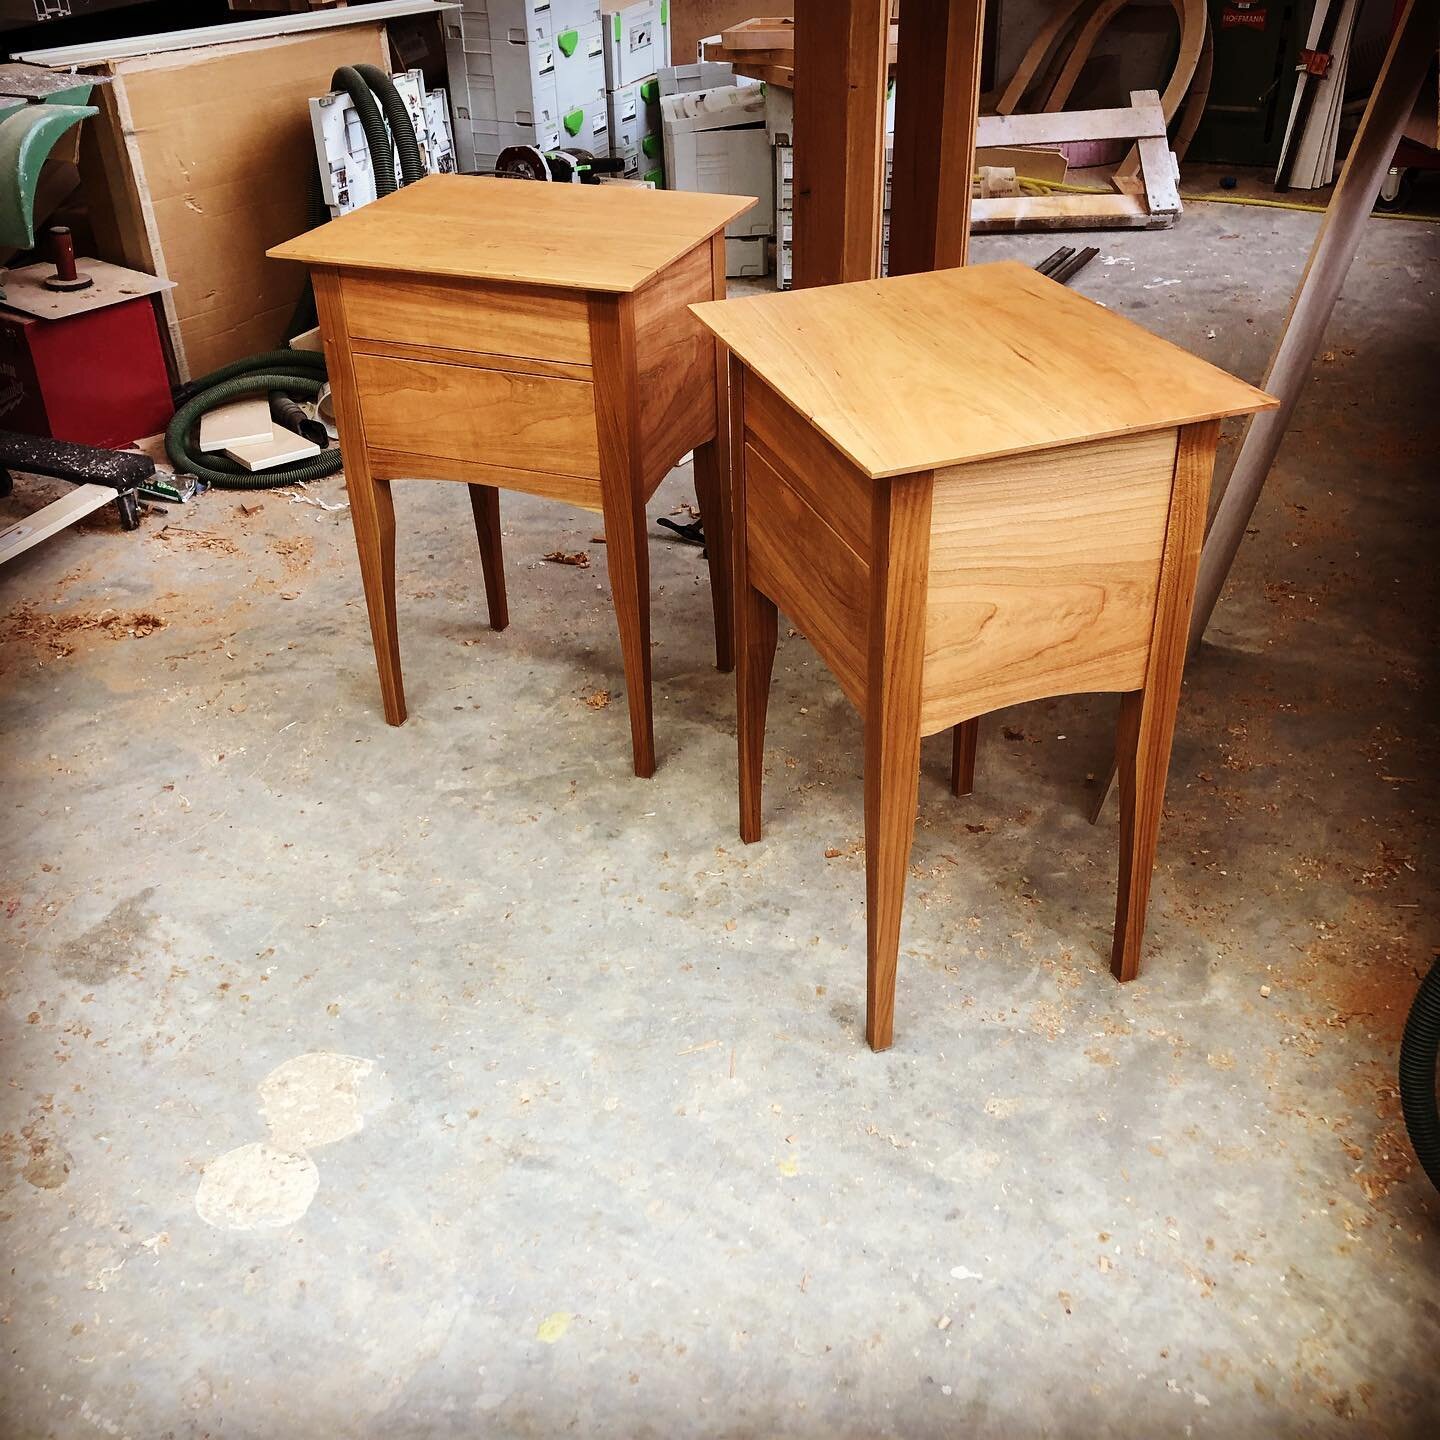 Well, other than picking out hardware, these are ready to leave. Nice pair of Cherry night tables in a shaker style with some added flair in the curves.
Quartered White Oak handcut dovetailed drawers. Clean and simple.
Finished in Sirca acrylic ureth